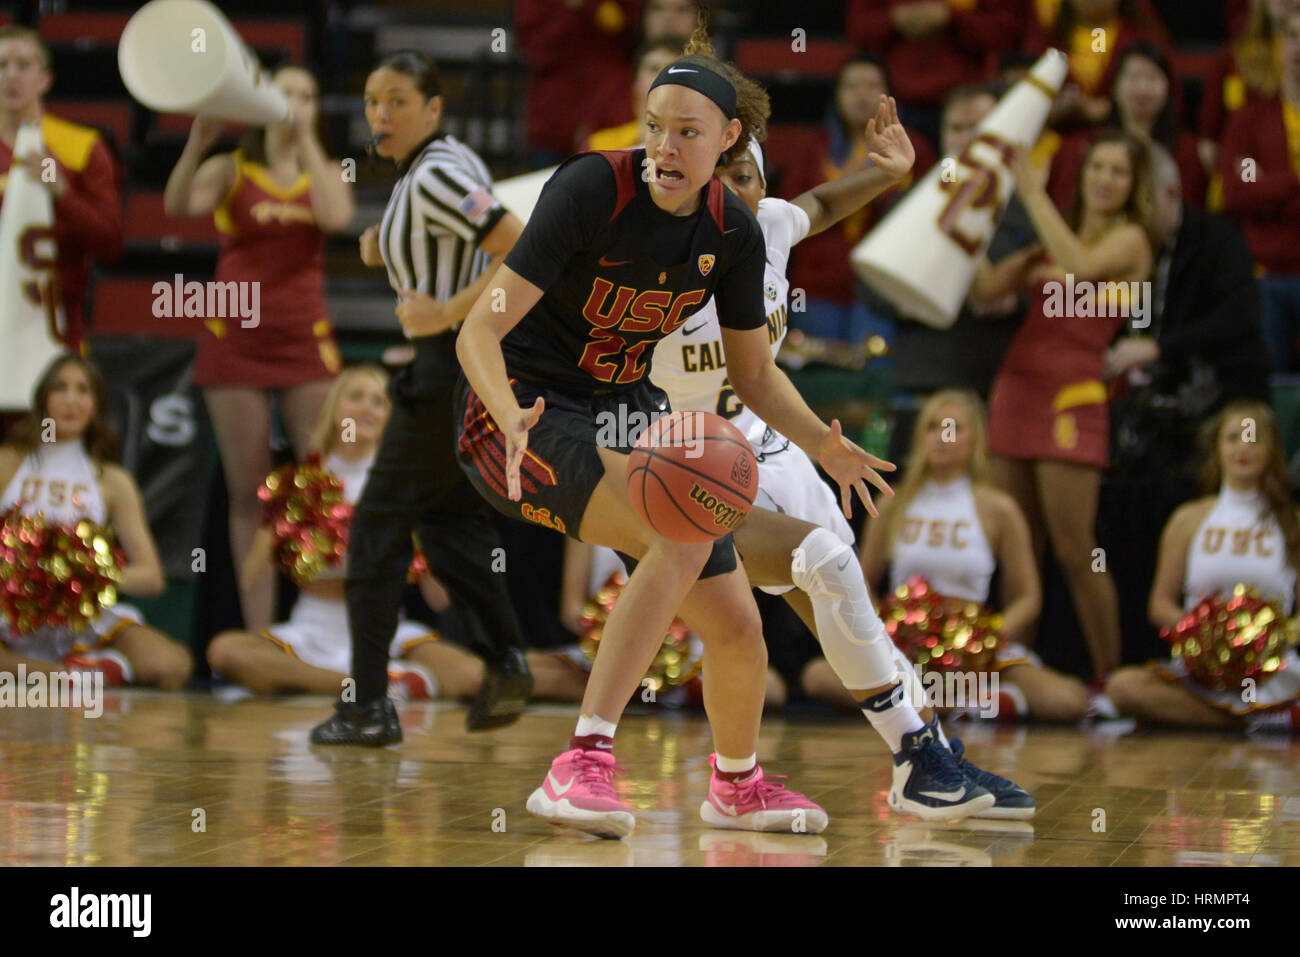 Seattle, WA, USA. 2nd Mar, 2017. USC's Valarie Higgins (22) in action during a PAC12 women's tournament game between the Cal Bears and the USC Trojans. The game was played at Key Arena in Seattle, WA. Jeff Halstead/CSM/Alamy Live News Stock Photo